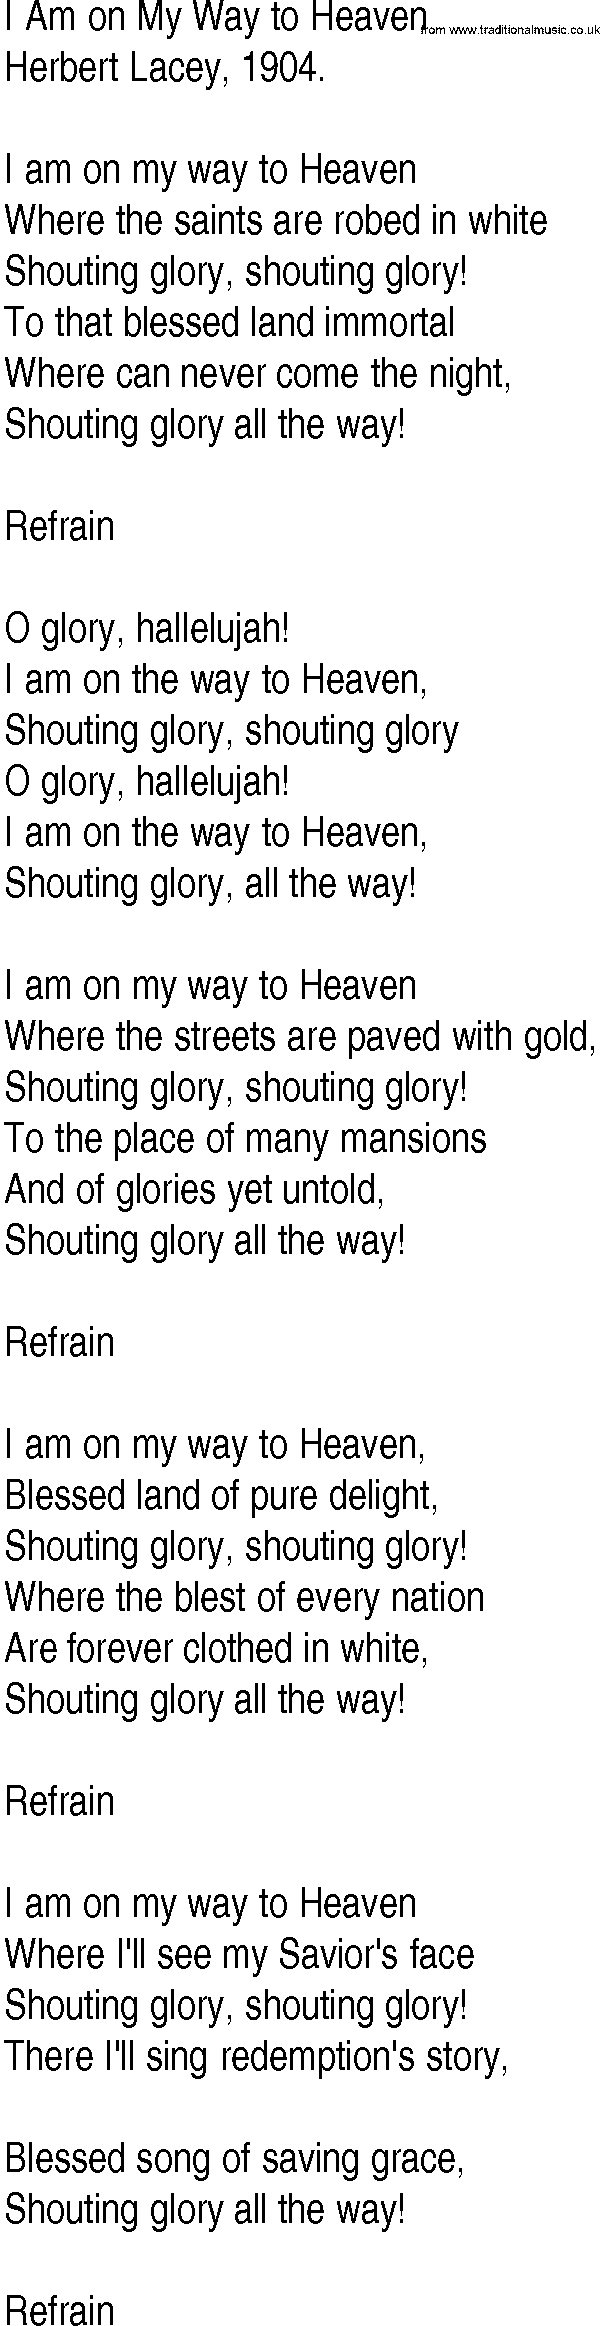 Hymn and Gospel Song: I Am on My Way to Heaven by Herbert Lacey lyrics